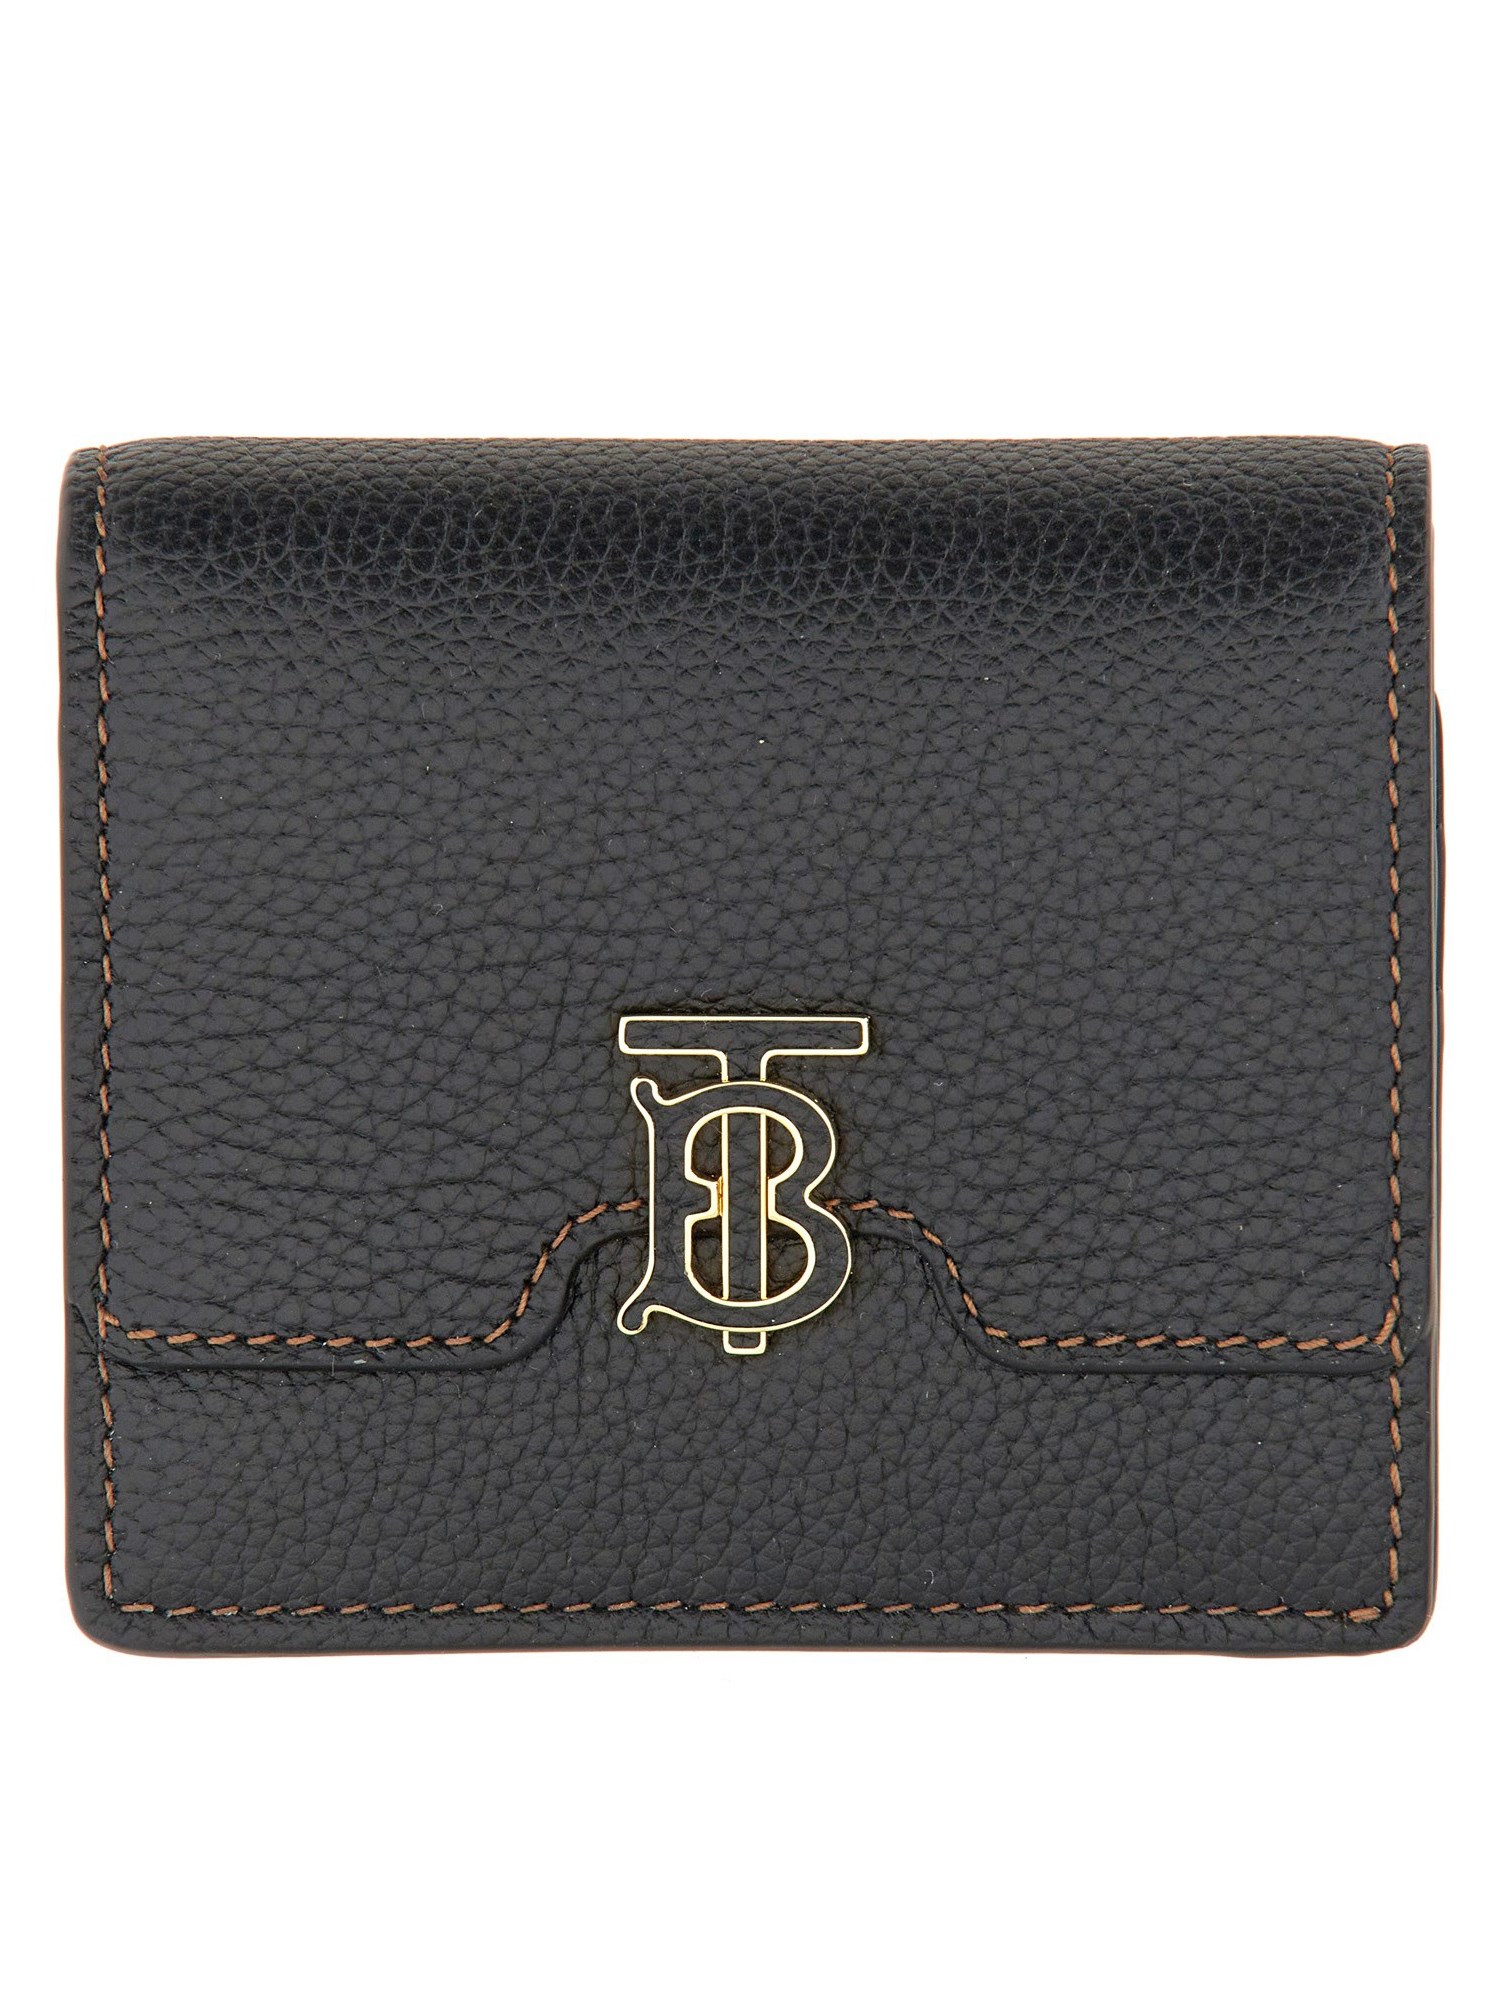 burberry tb book wallet